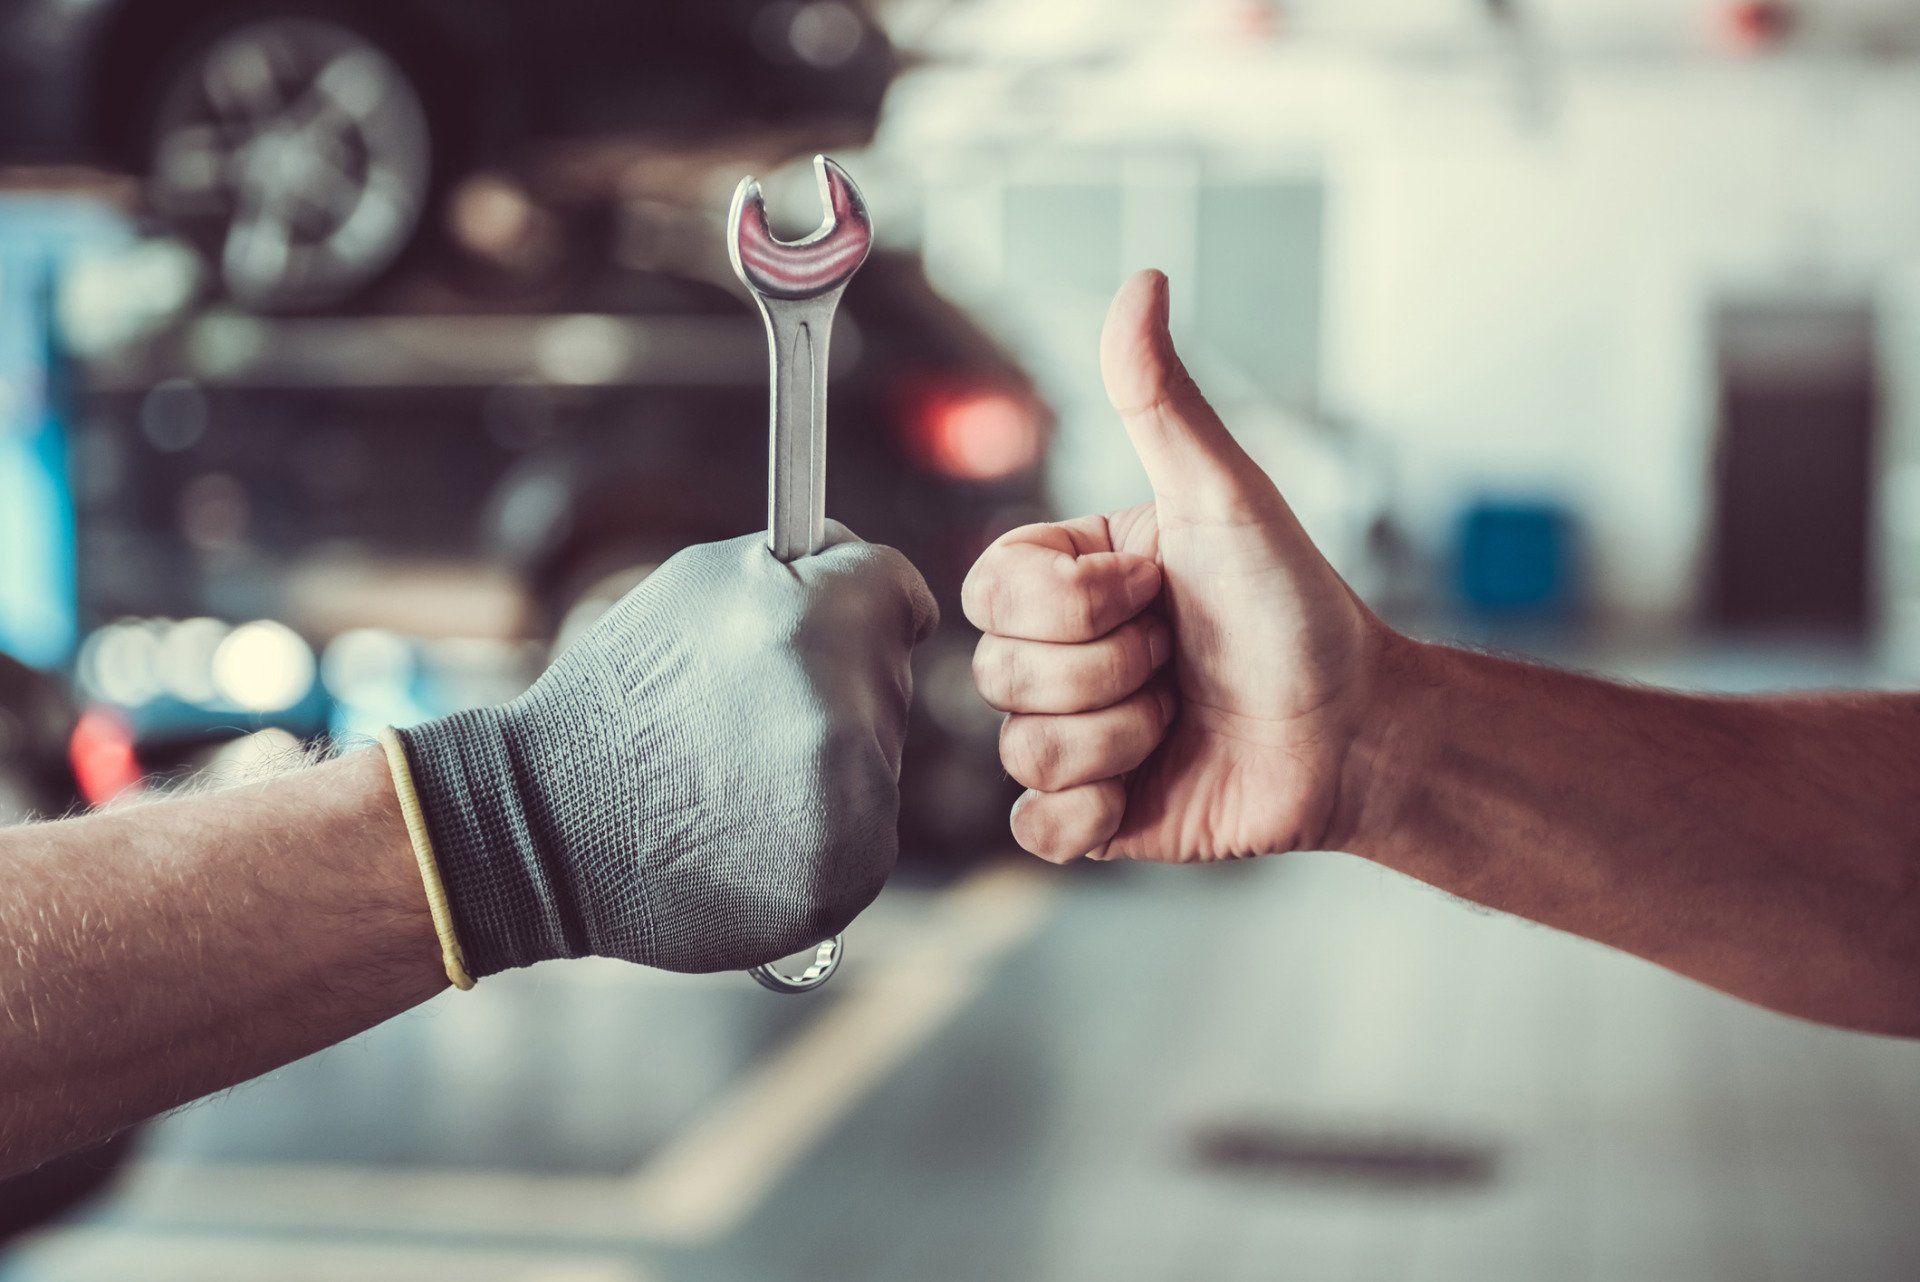 Brake Service Near Me — Mechanic and Client Hands in Bexley, OH